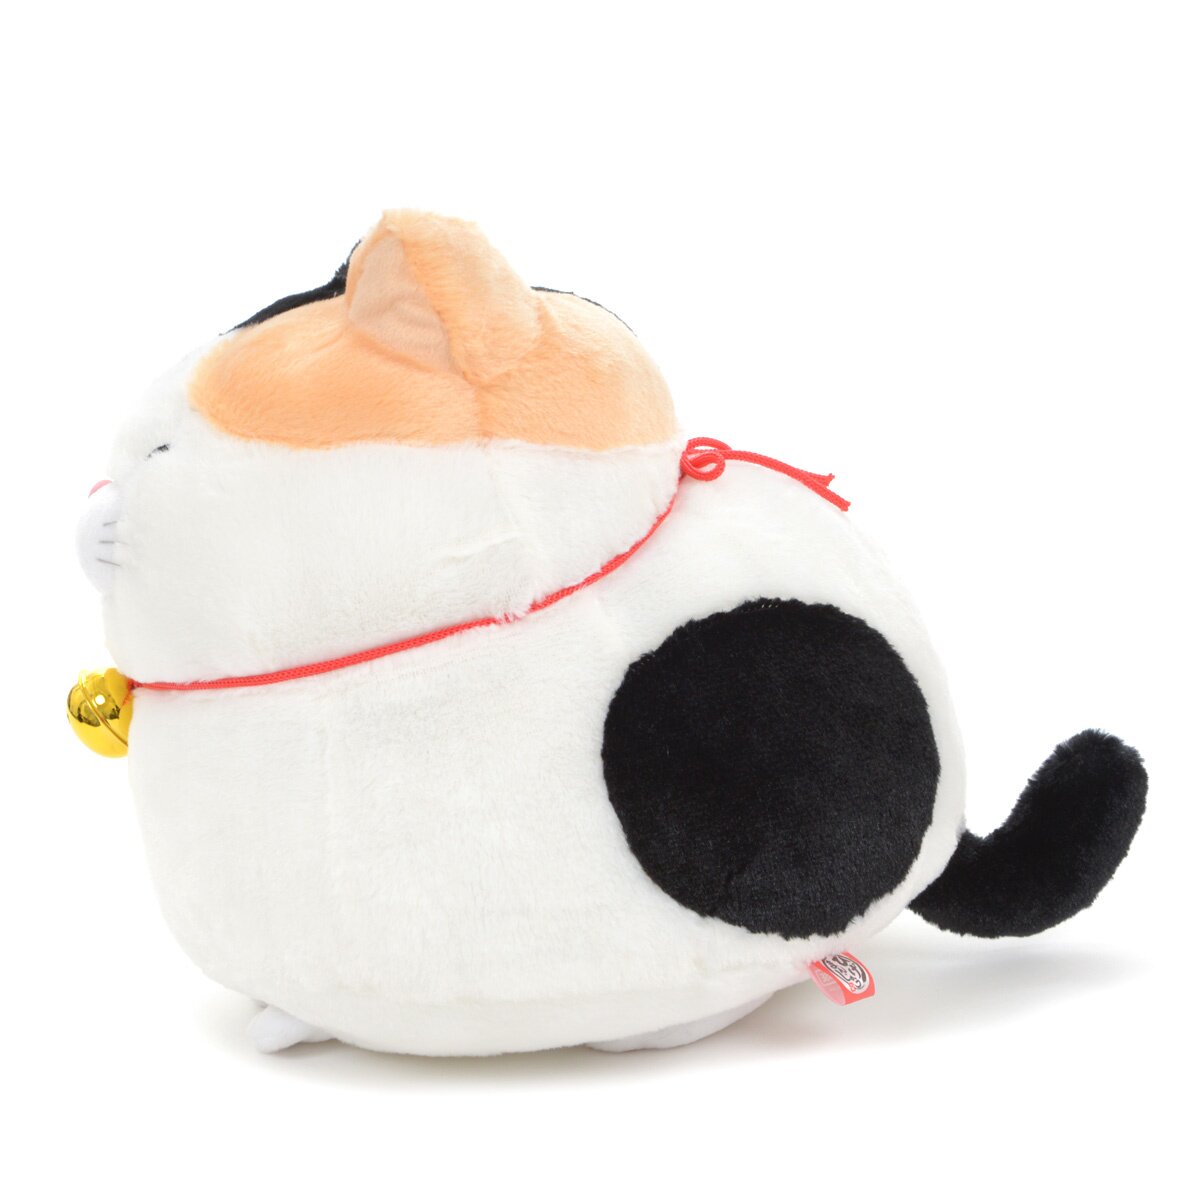 Fuuto Tantei (Fuuto PI) Merch Page 4  Buy from Goods Republic - Online  Store for Official Japanese Merchandise, Featuring Plush